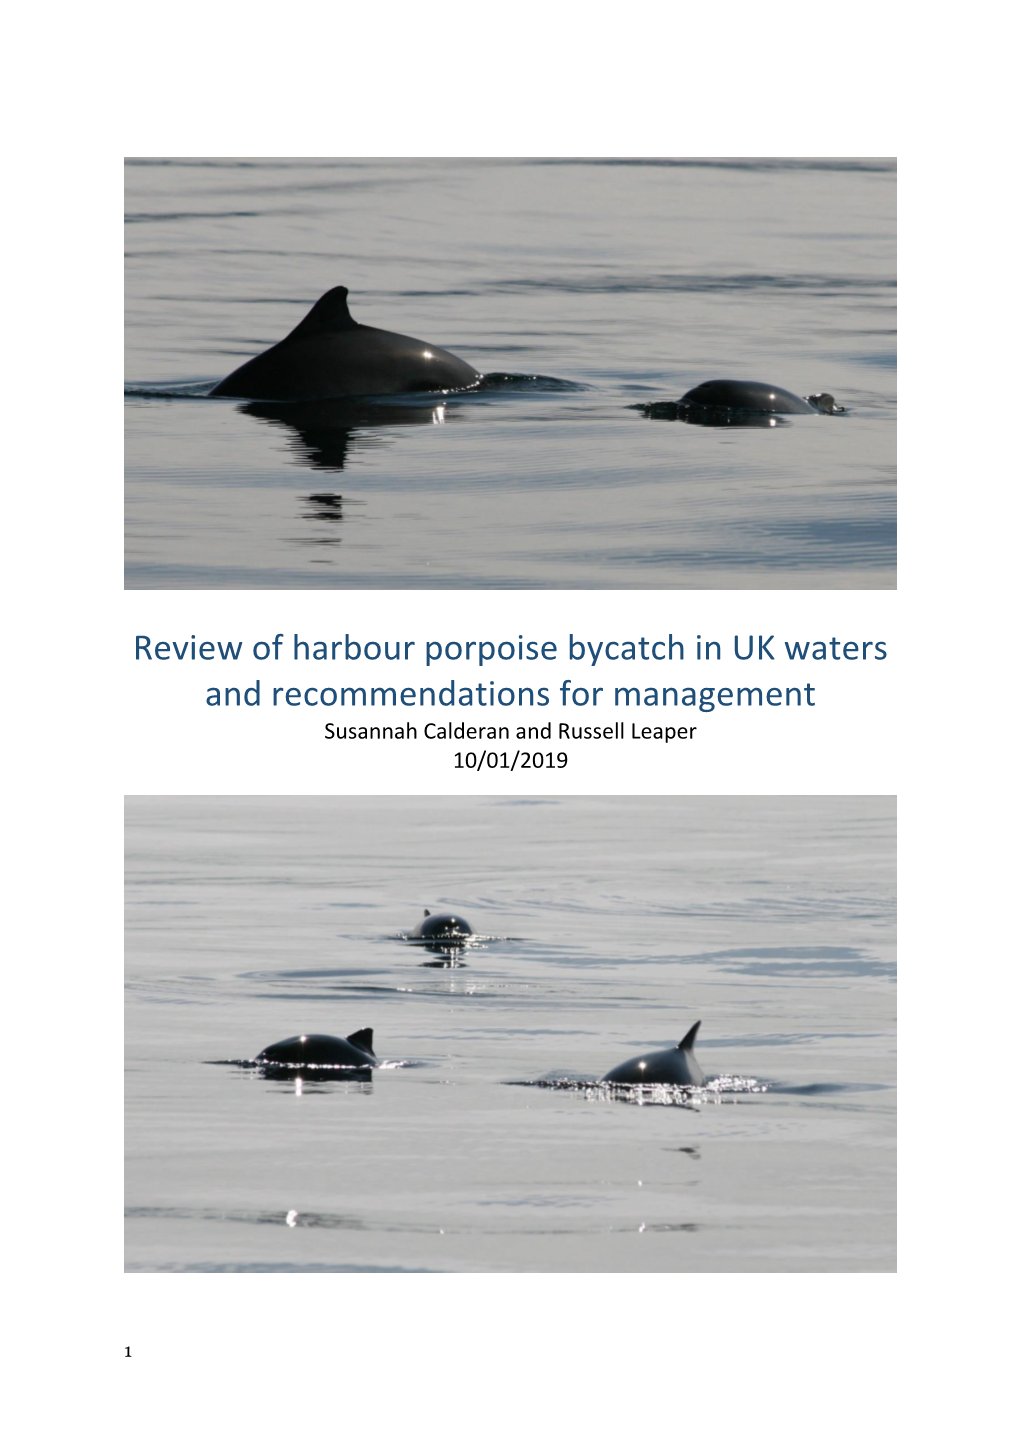 Review of Harbour Porpoise Bycatch in UK Waters and Recommendations for Management Susannah Calderan and Russell Leaper 10/01/2019